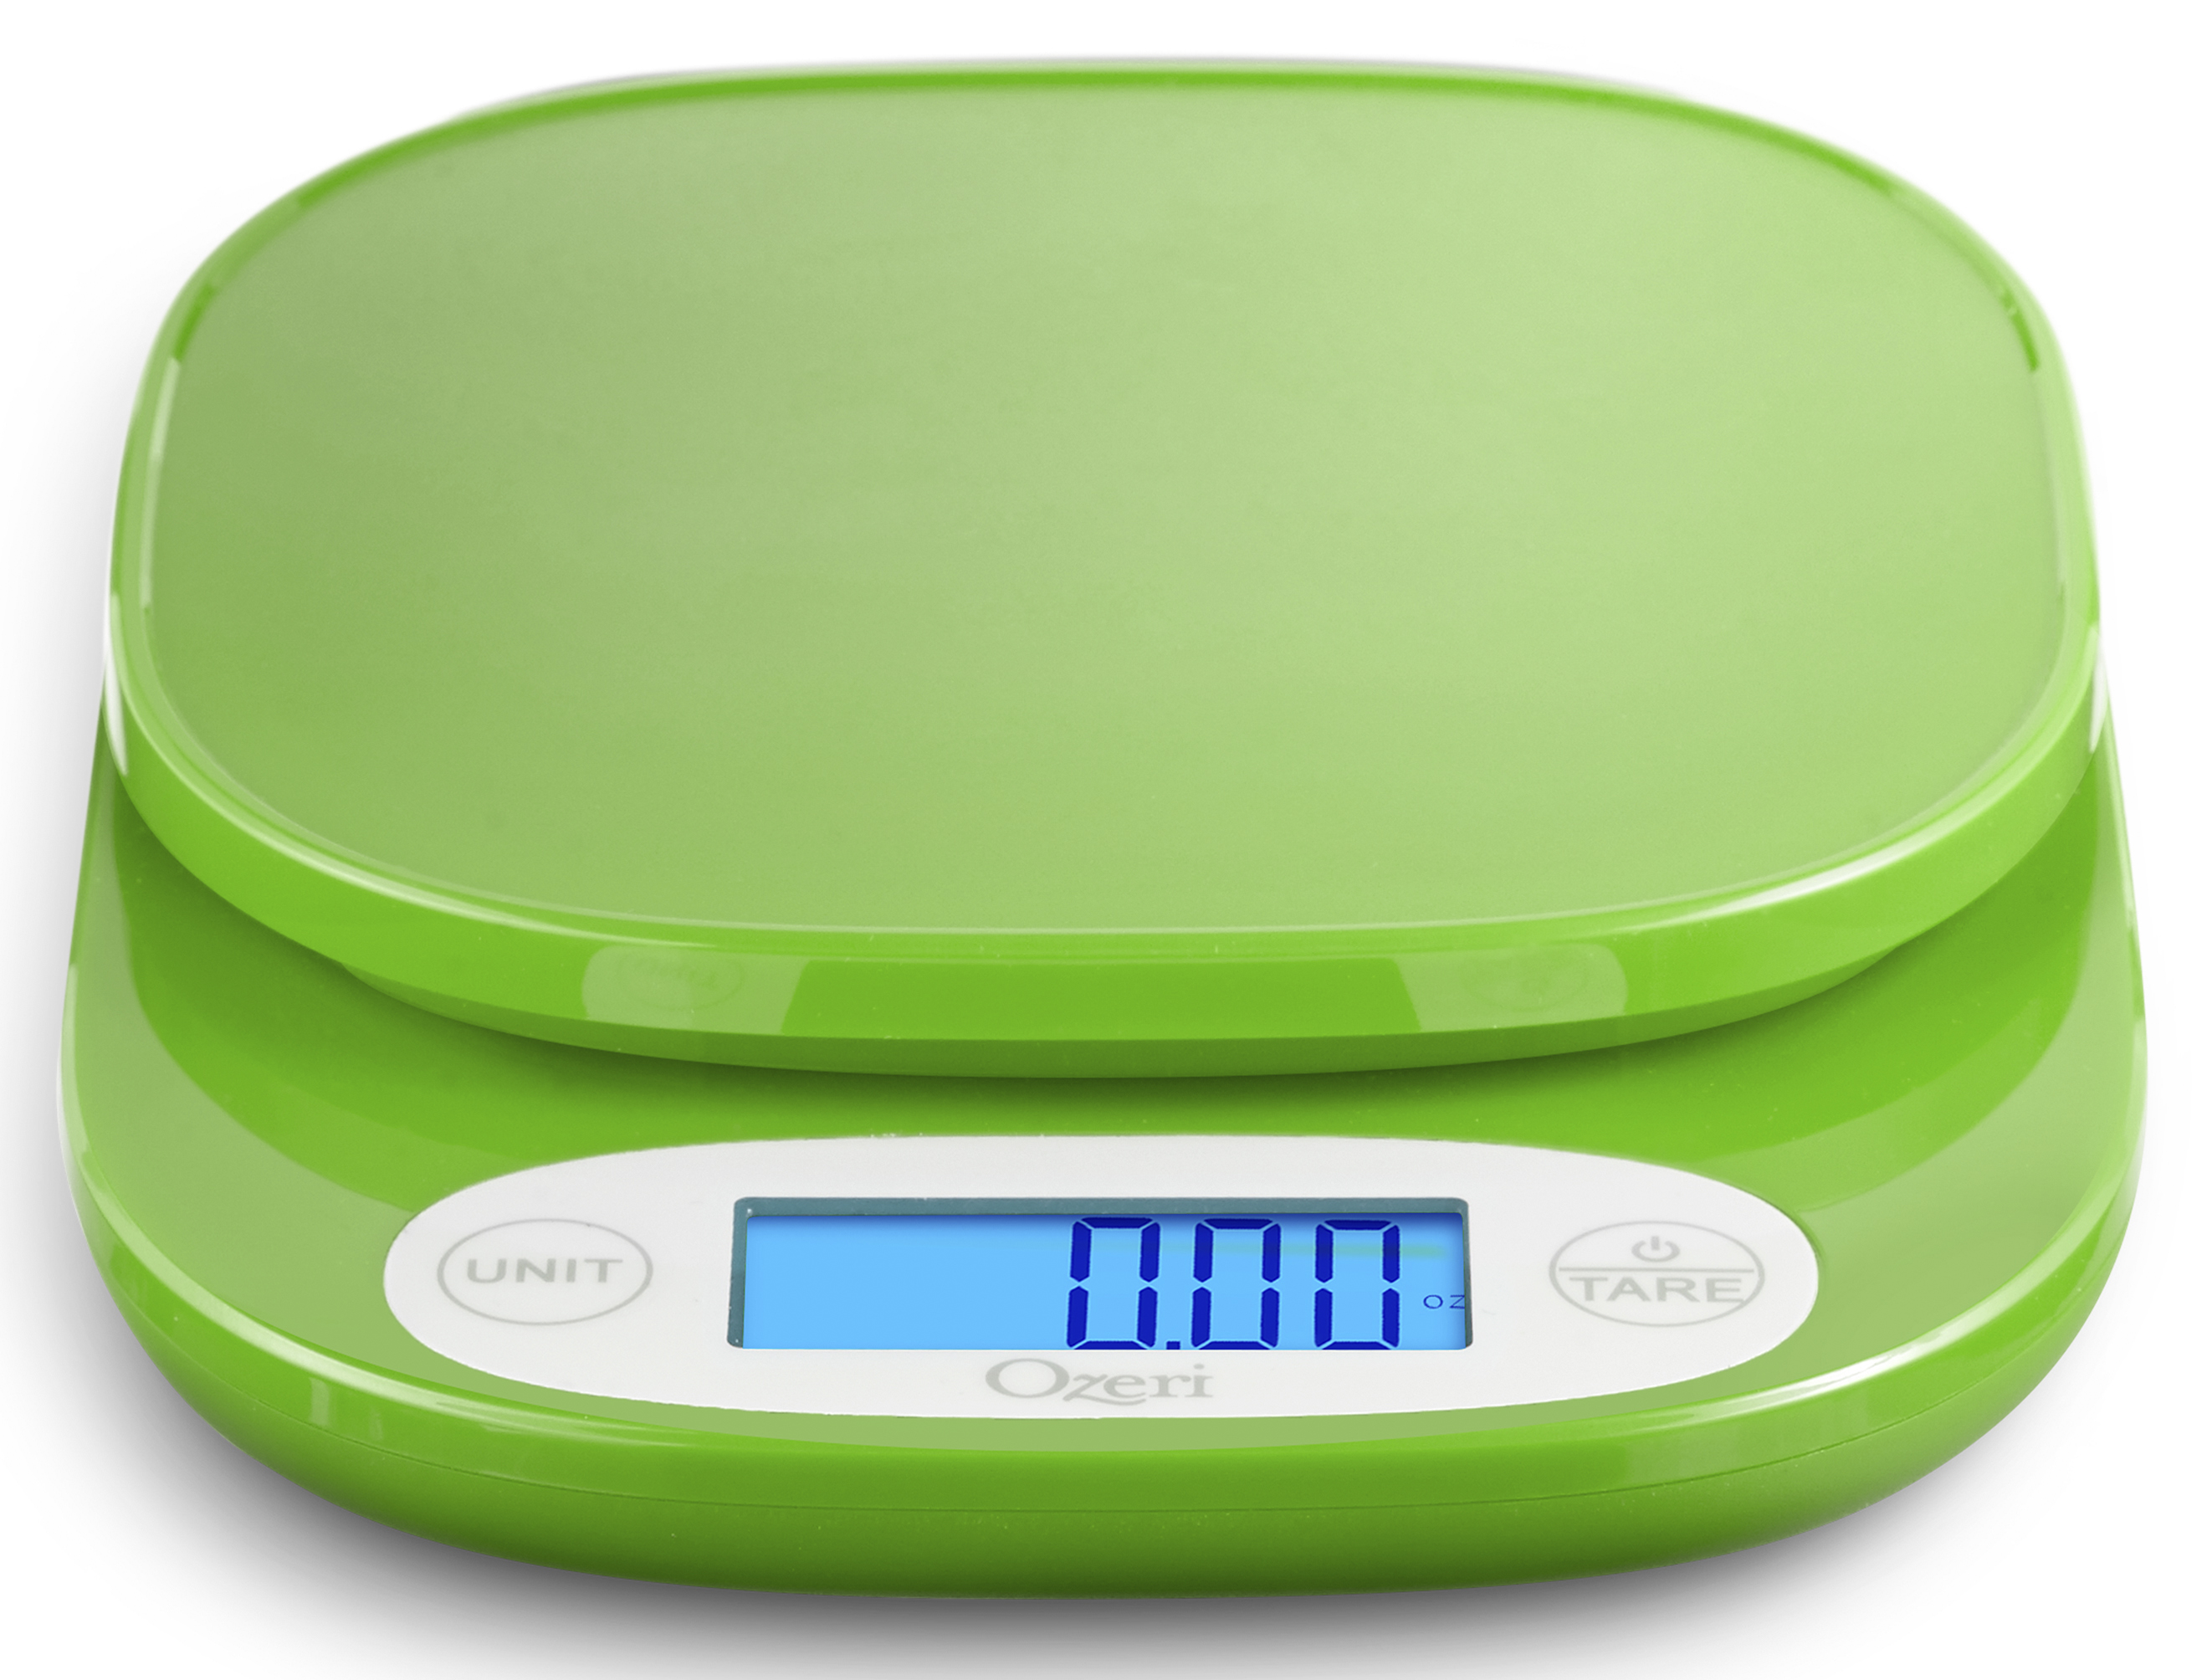 Ozeri ZK24 Garden and Kitchen Scale, with 0.5 g (0.01 oz) Precision Weighing Technology - image 4 of 5